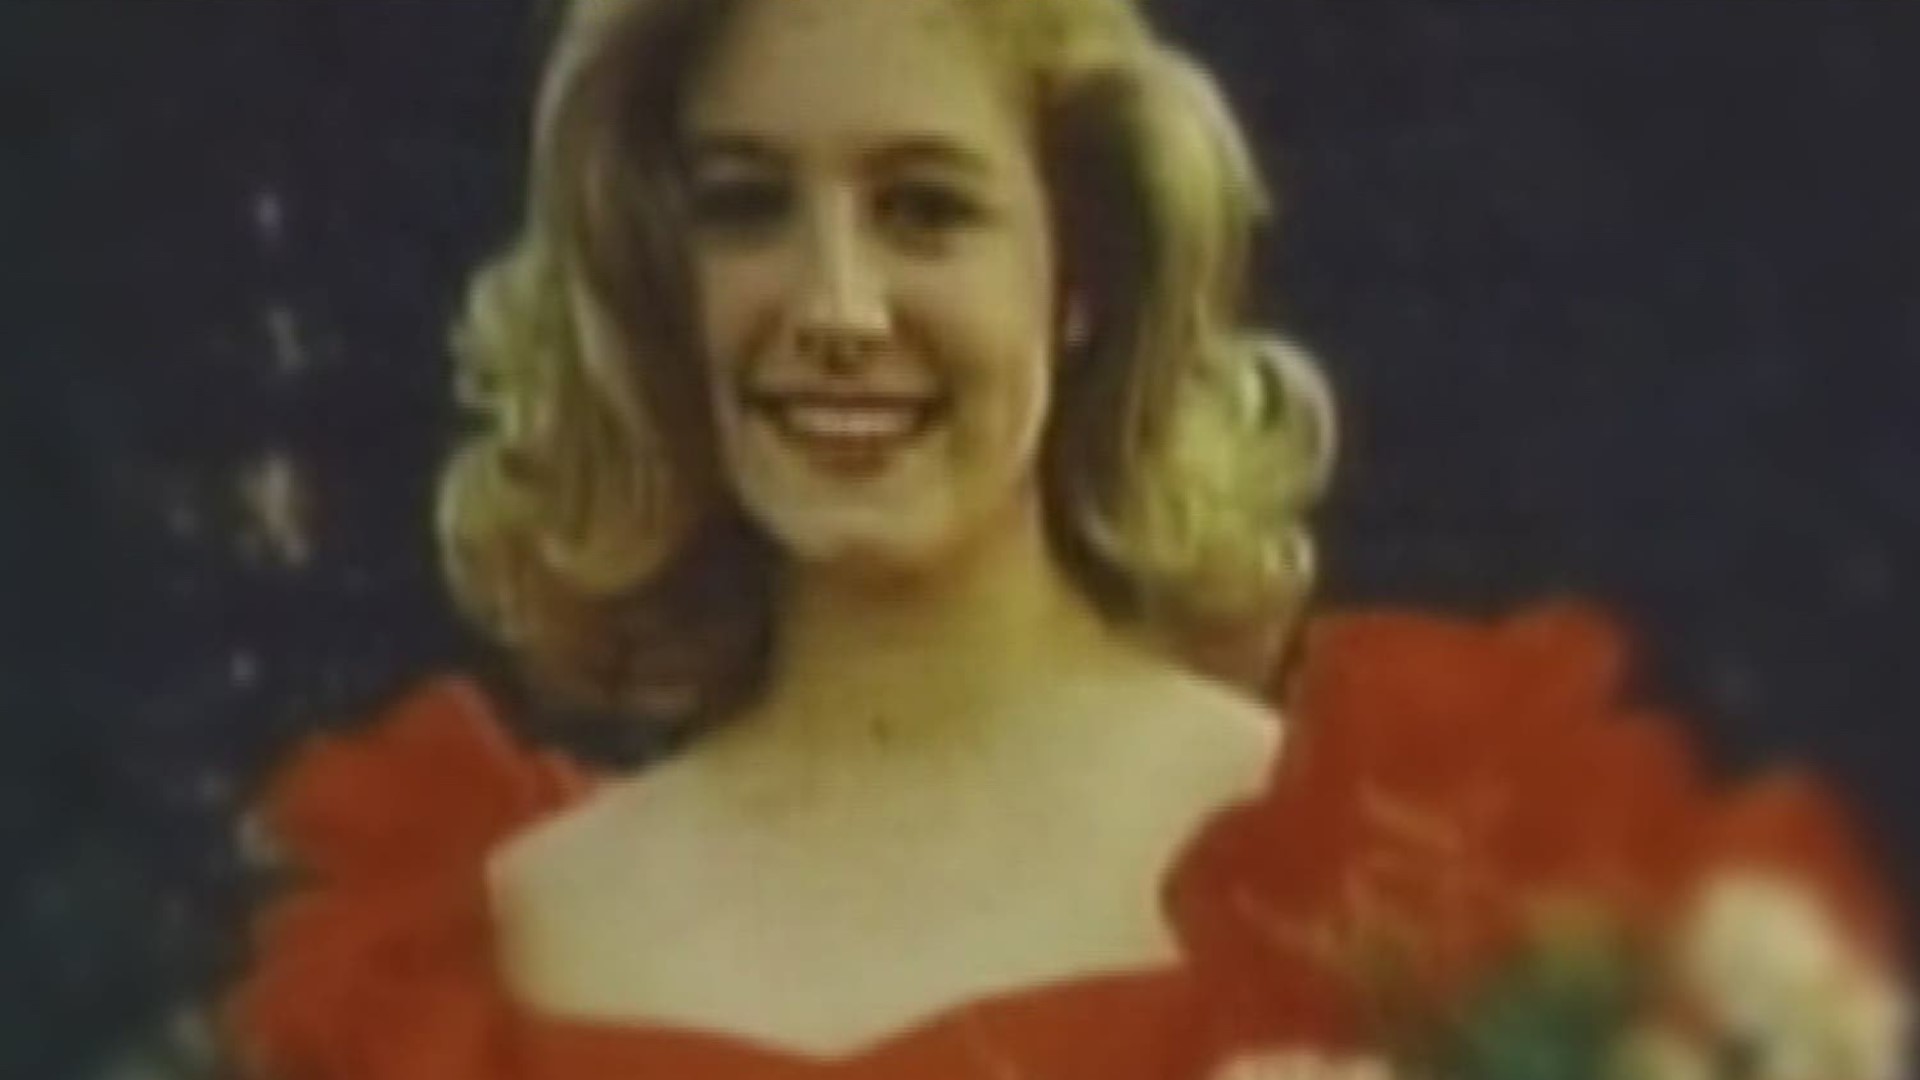 It's been nearly 30 years since Melissa Witt was murdered in Fort Smith, but a retired detective and an Arkansas woman are hoping to make a break in the case.